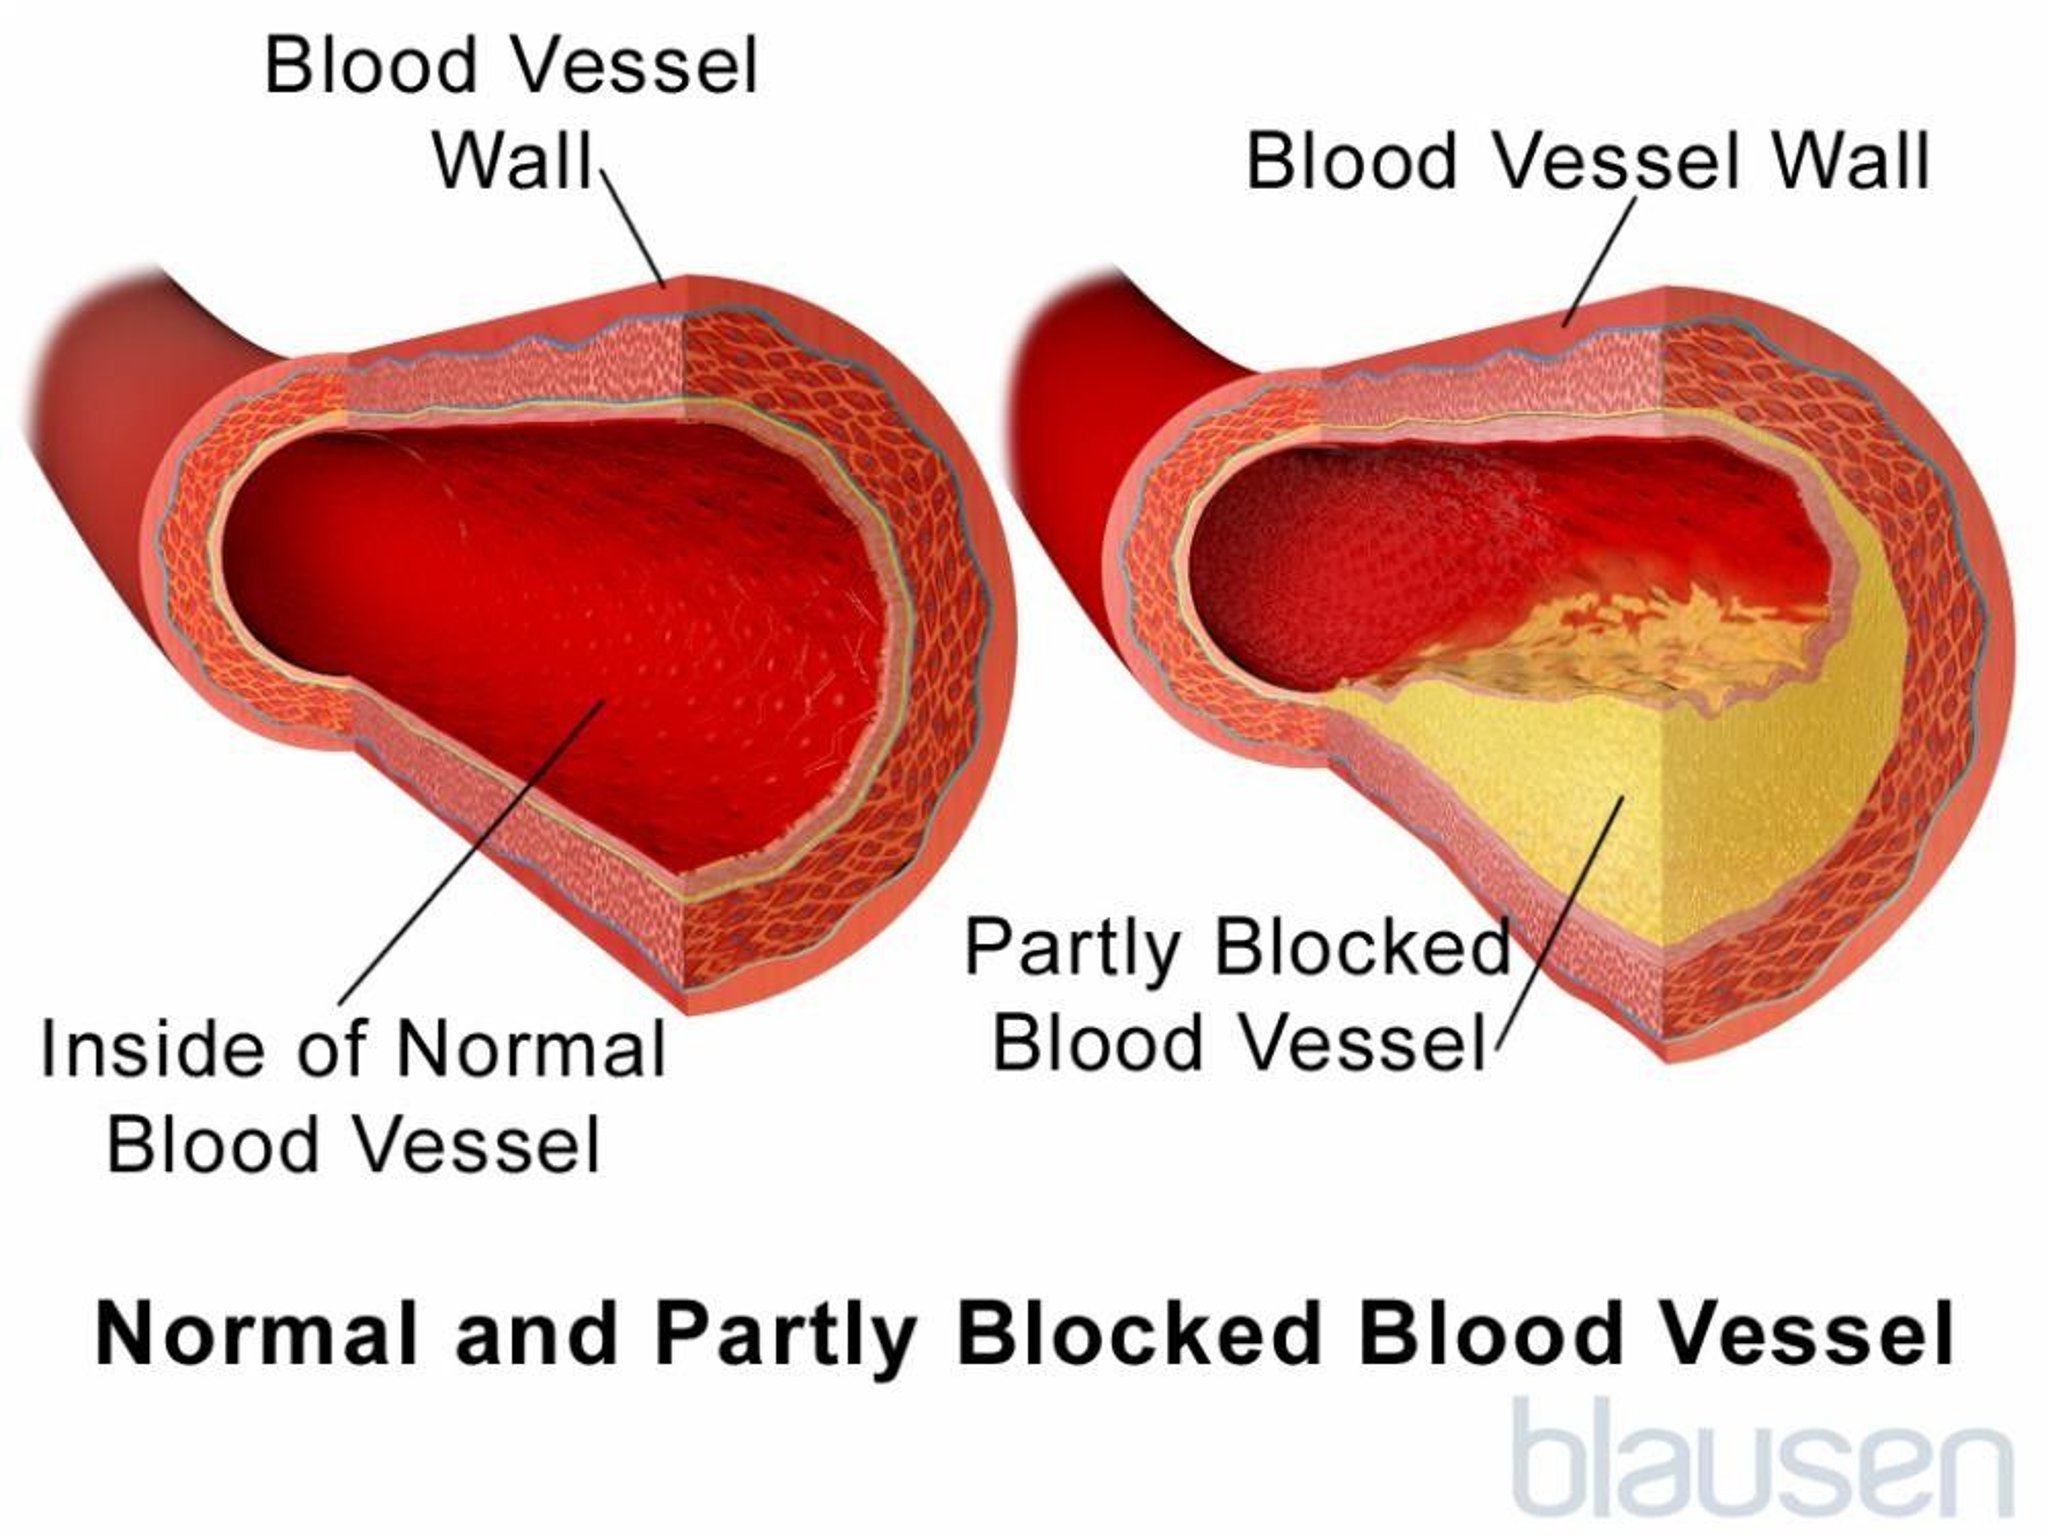 Normal Blood Vessel and Partially Blocked Blood Vessel